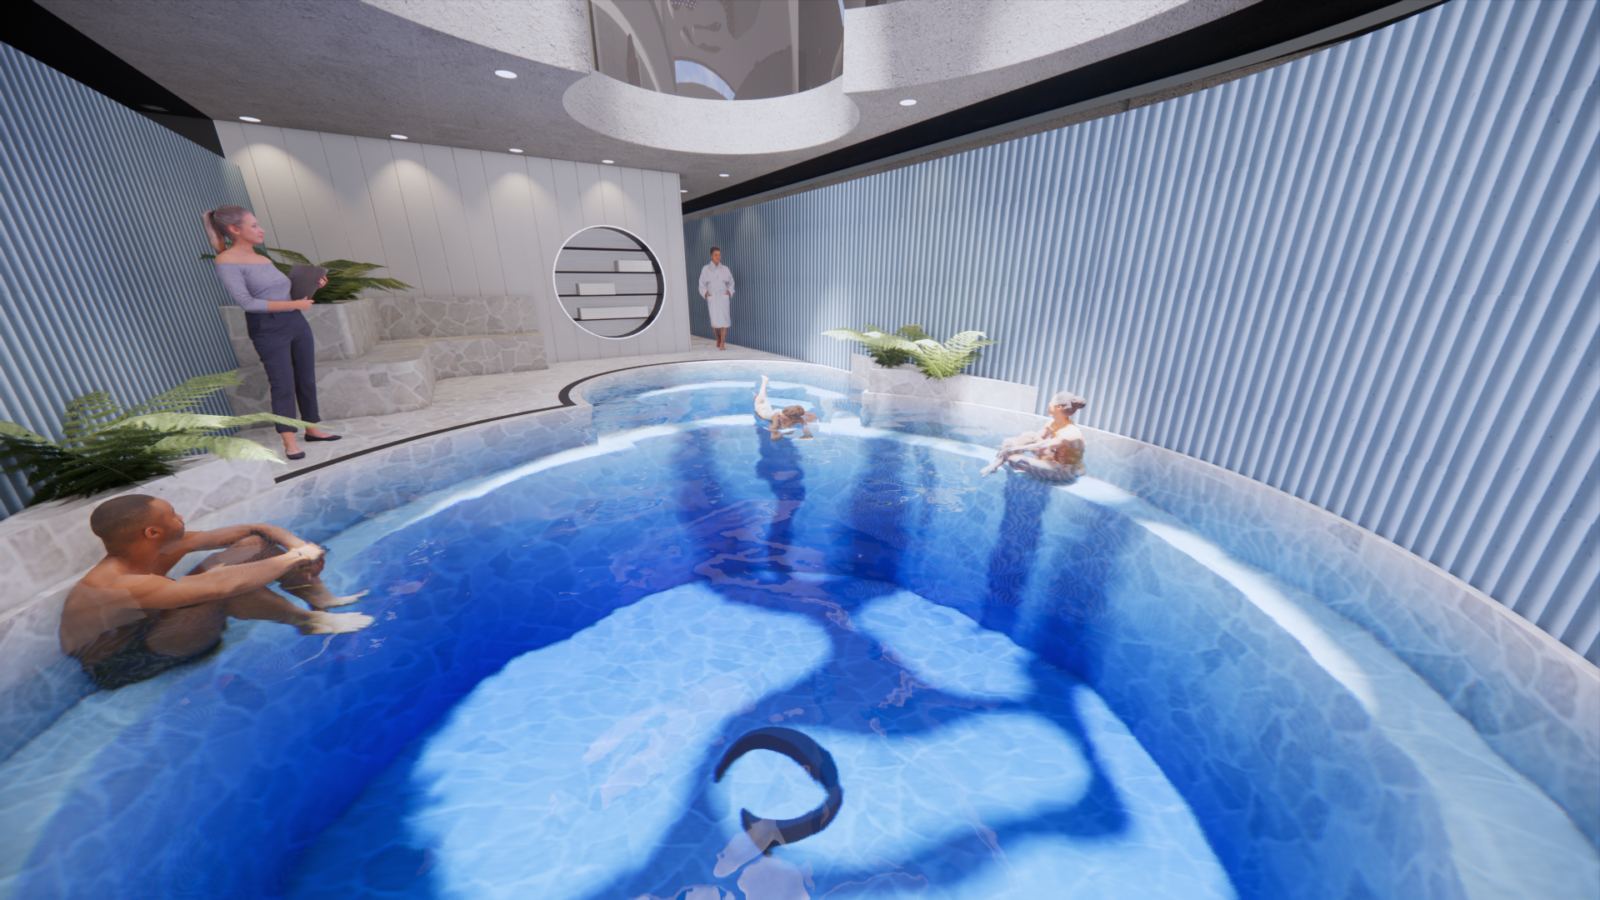 The pool has natural light in the form of the Cottage causation map dancing in the water, with users being guided by a physiologist. Blue scalloped wall linings wrap around the interior curved wall.